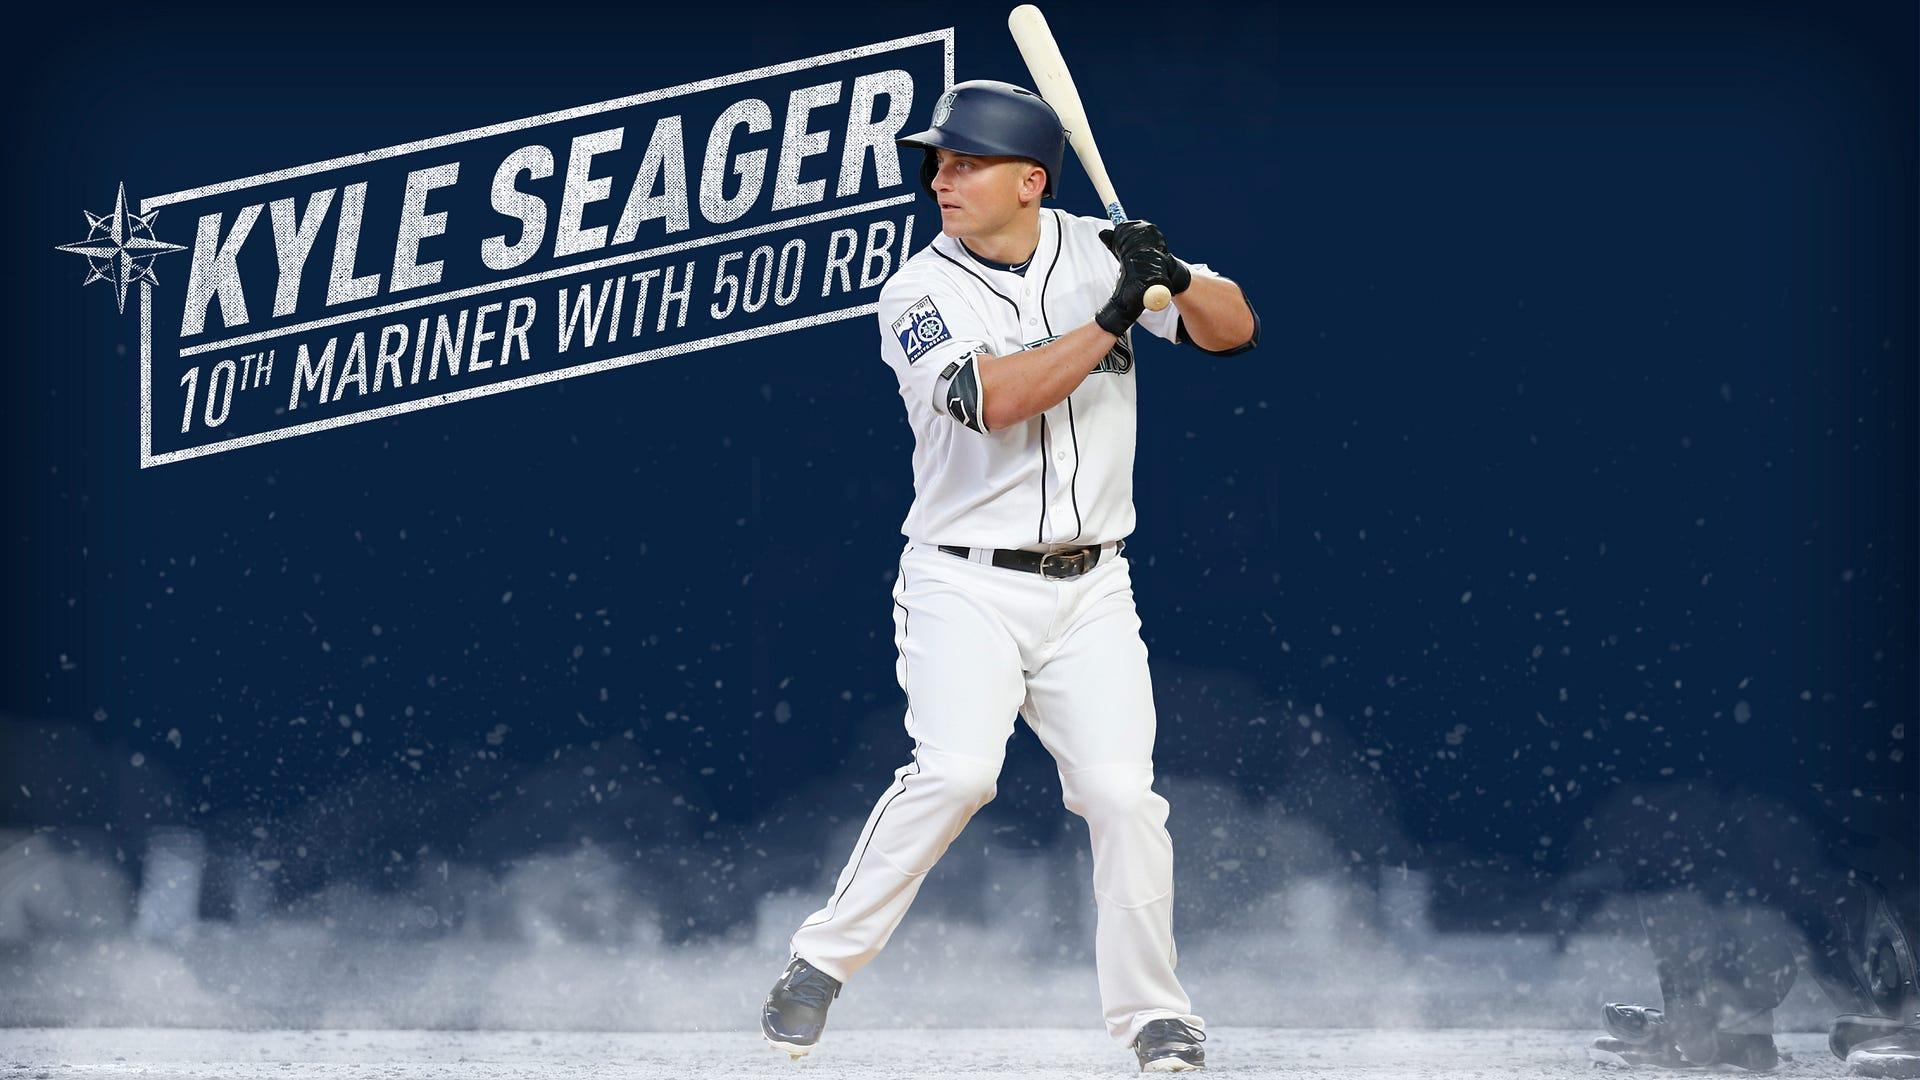 Seager vs. Cancer, by Mariners PR